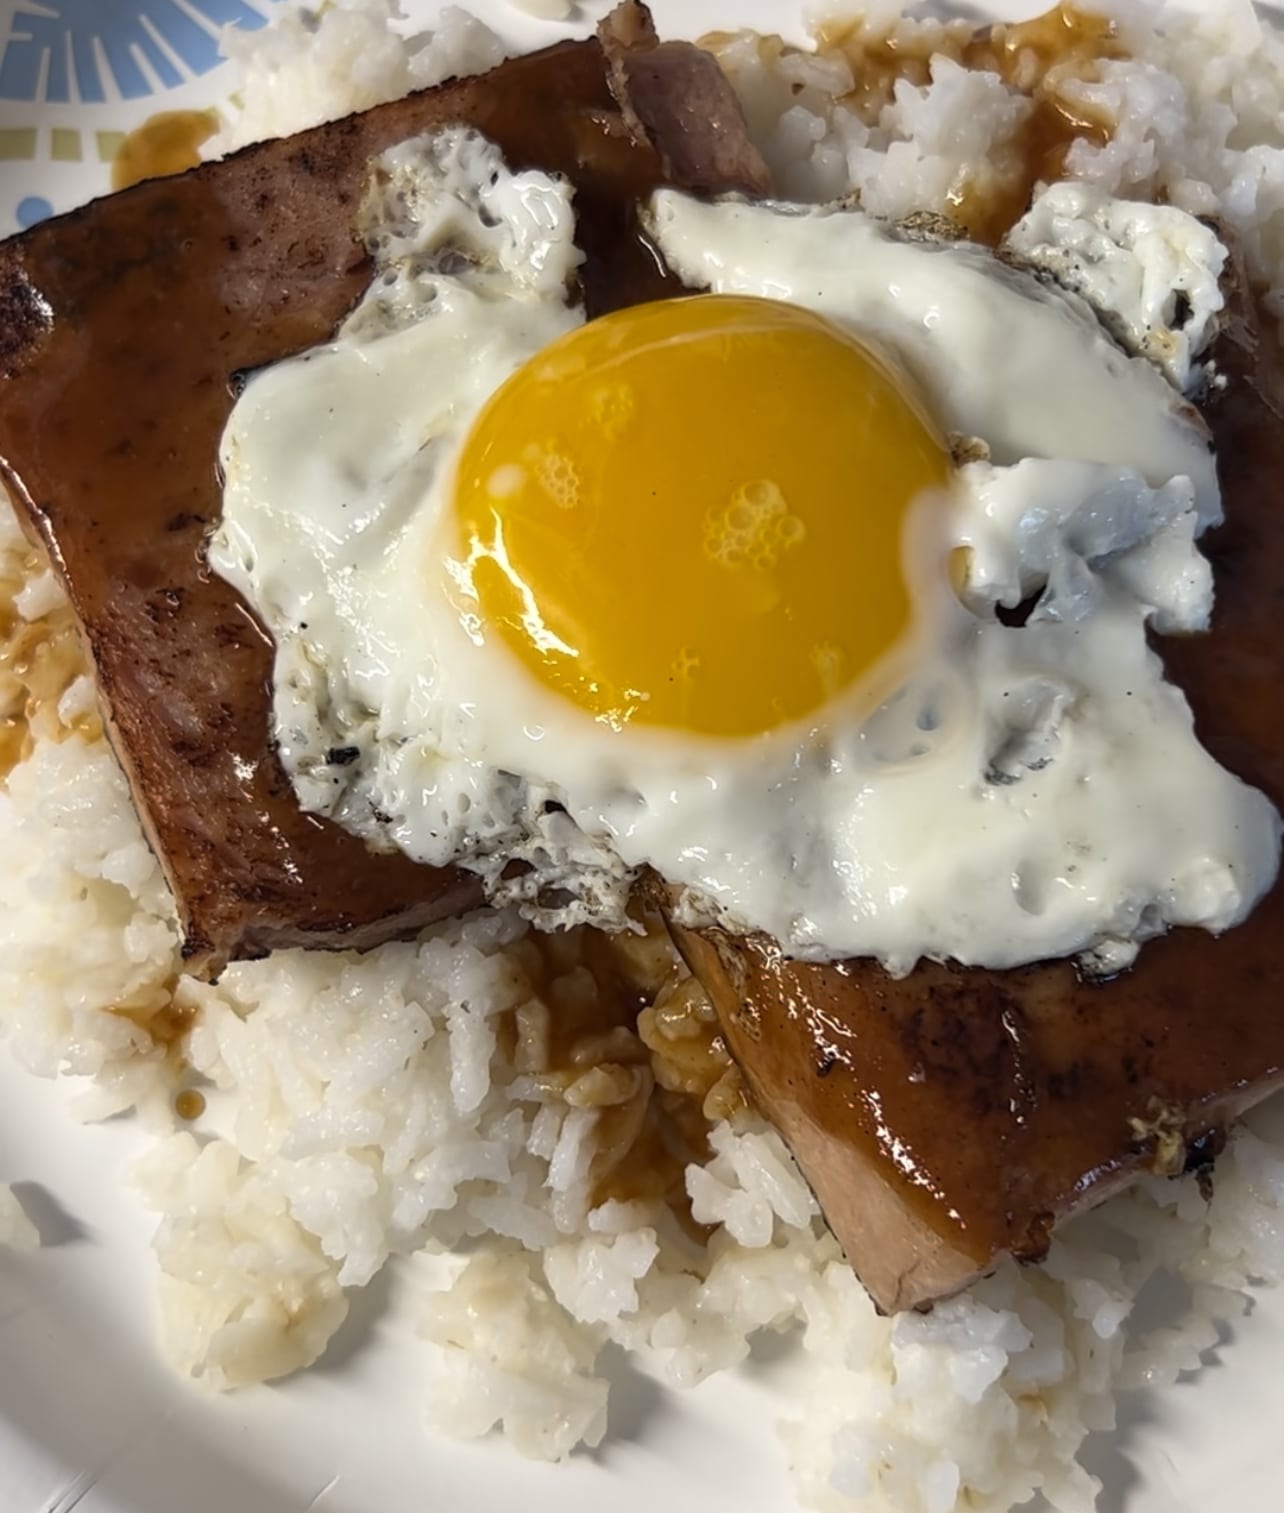 BBQ Egg and Rice dish from maui chop house